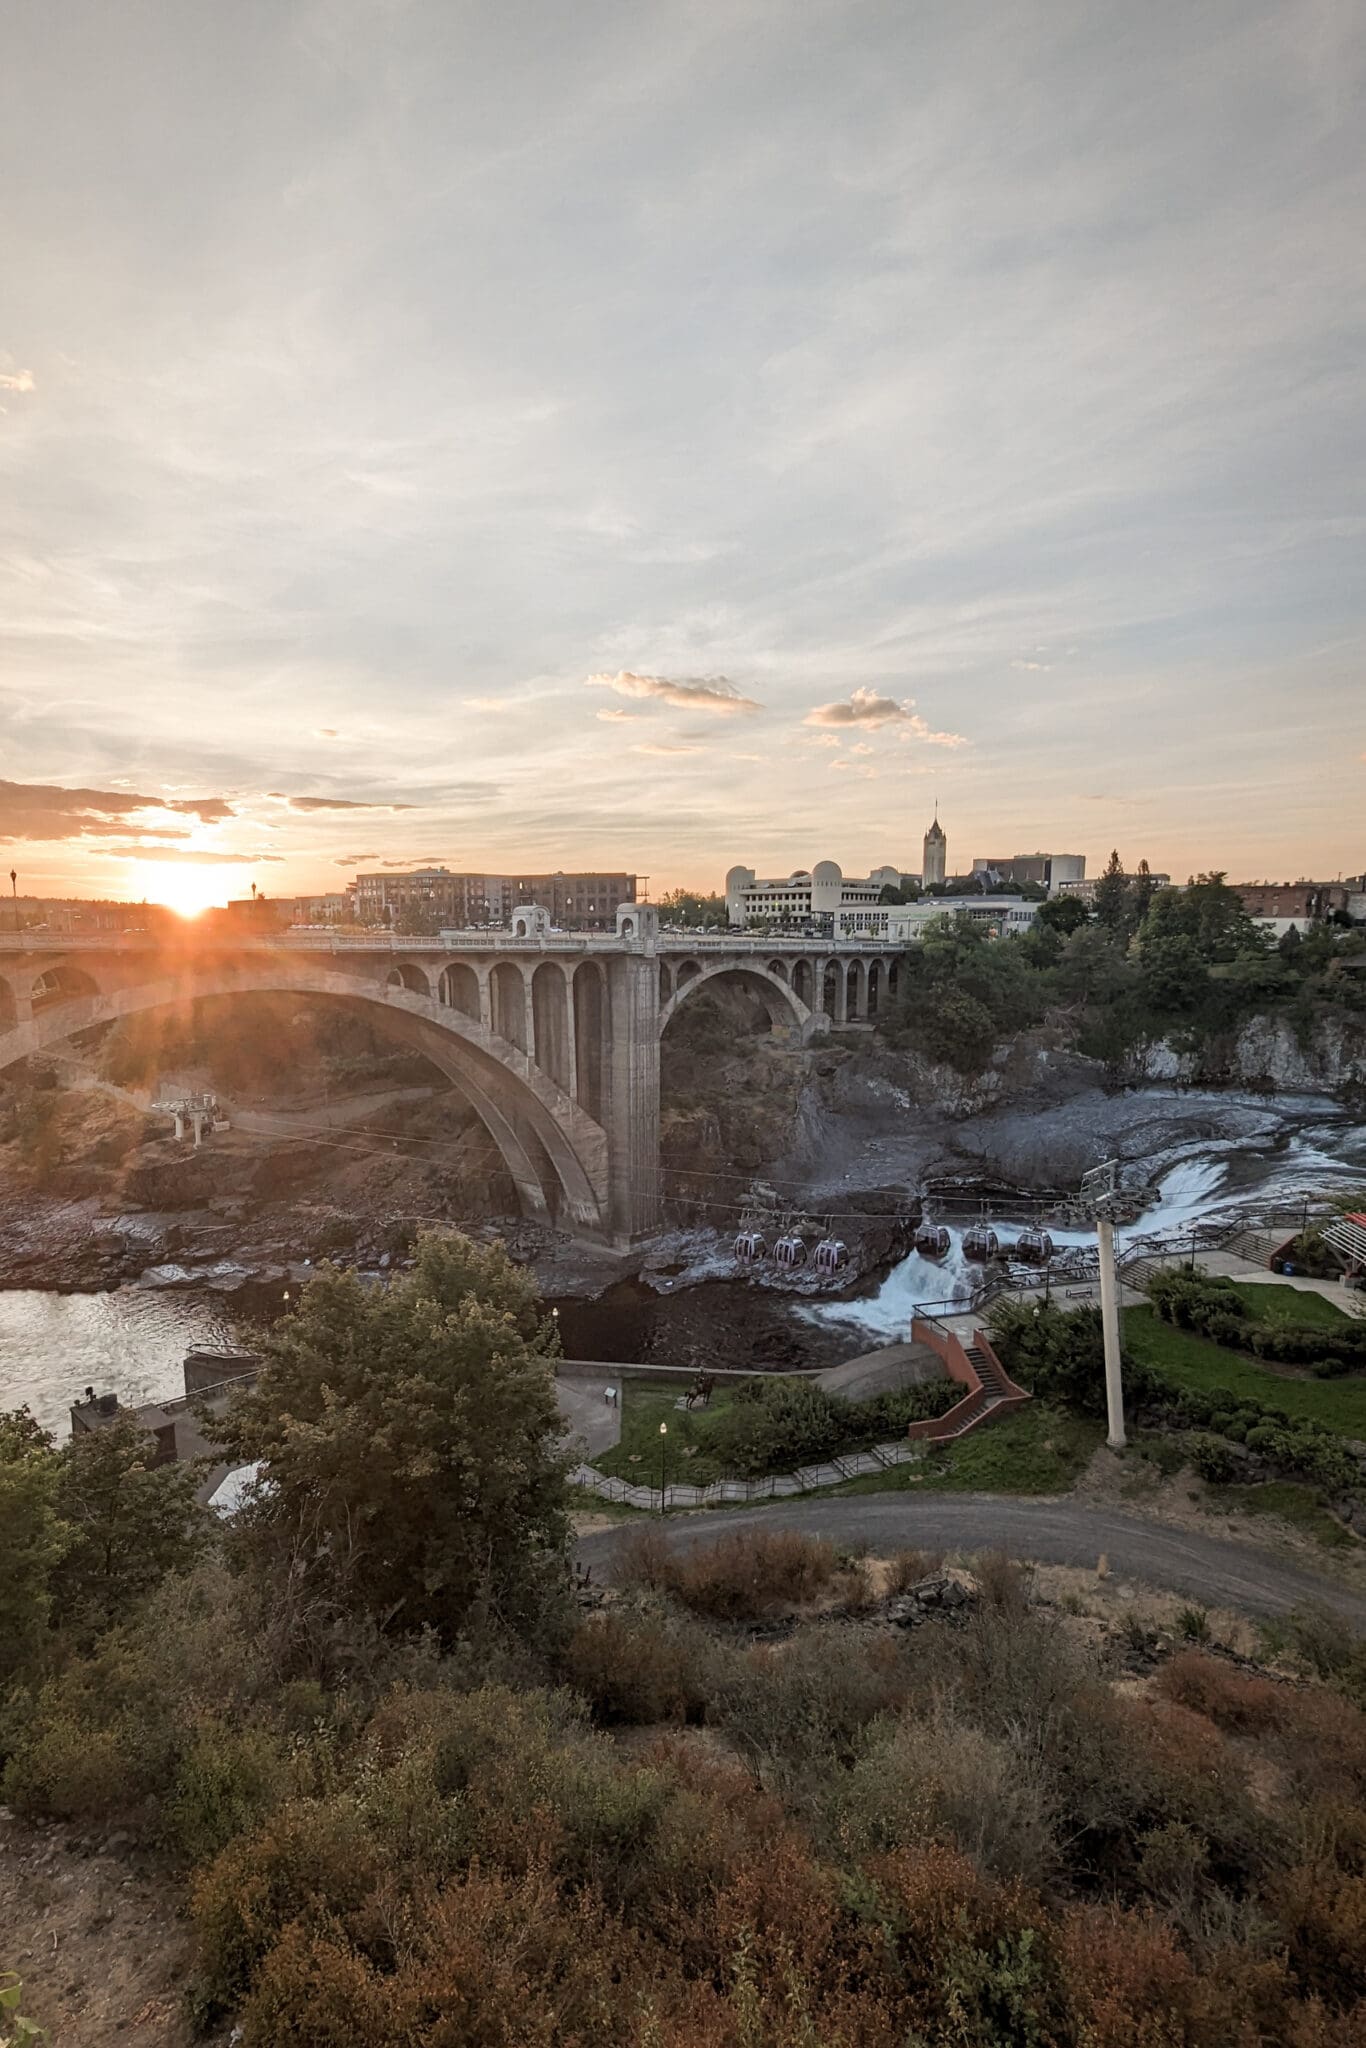 View of the Spokane River at sunset